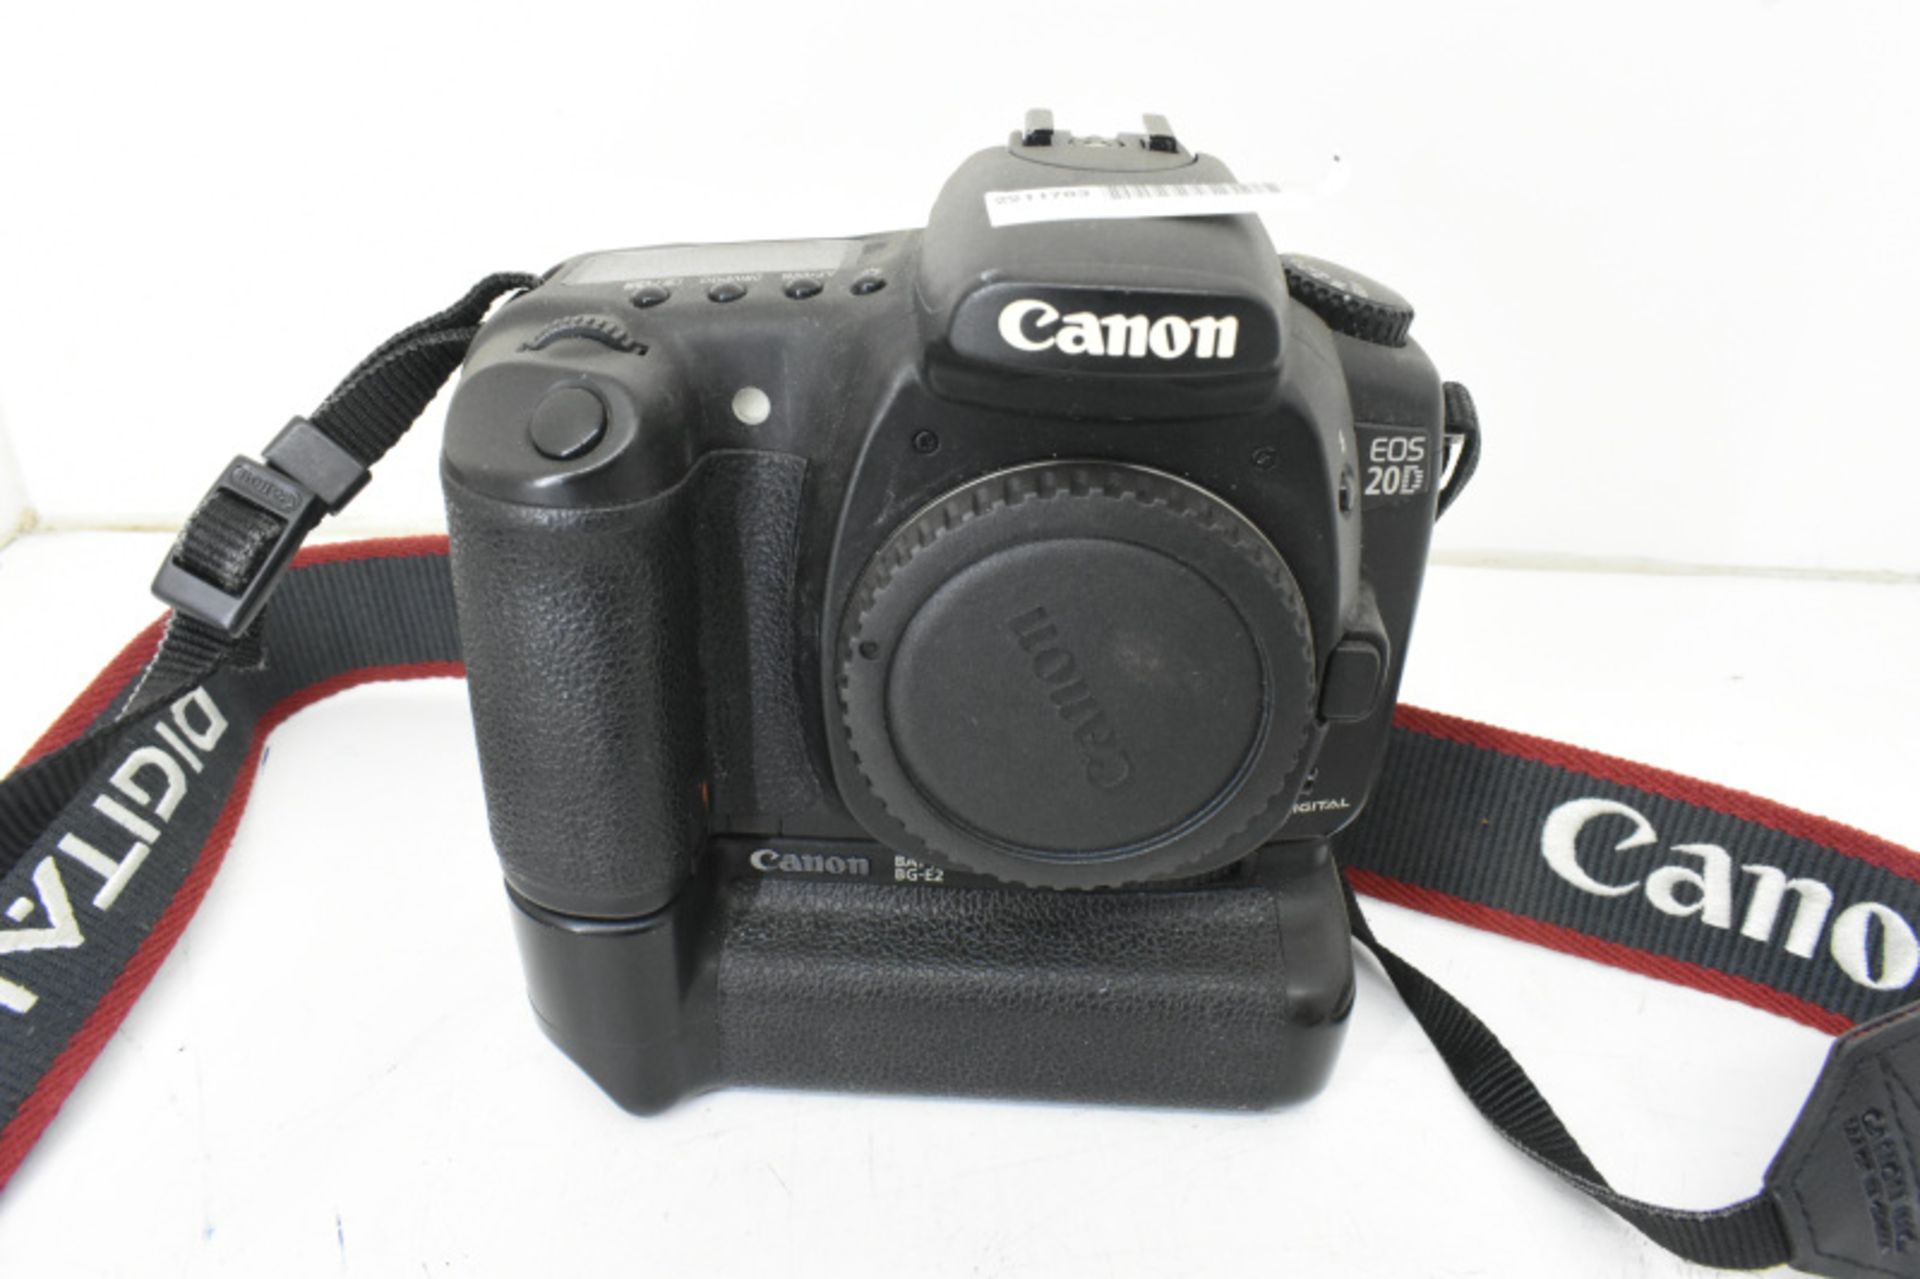 Canon EOS 20D DS126061 digital camera with accessories - Image 2 of 4